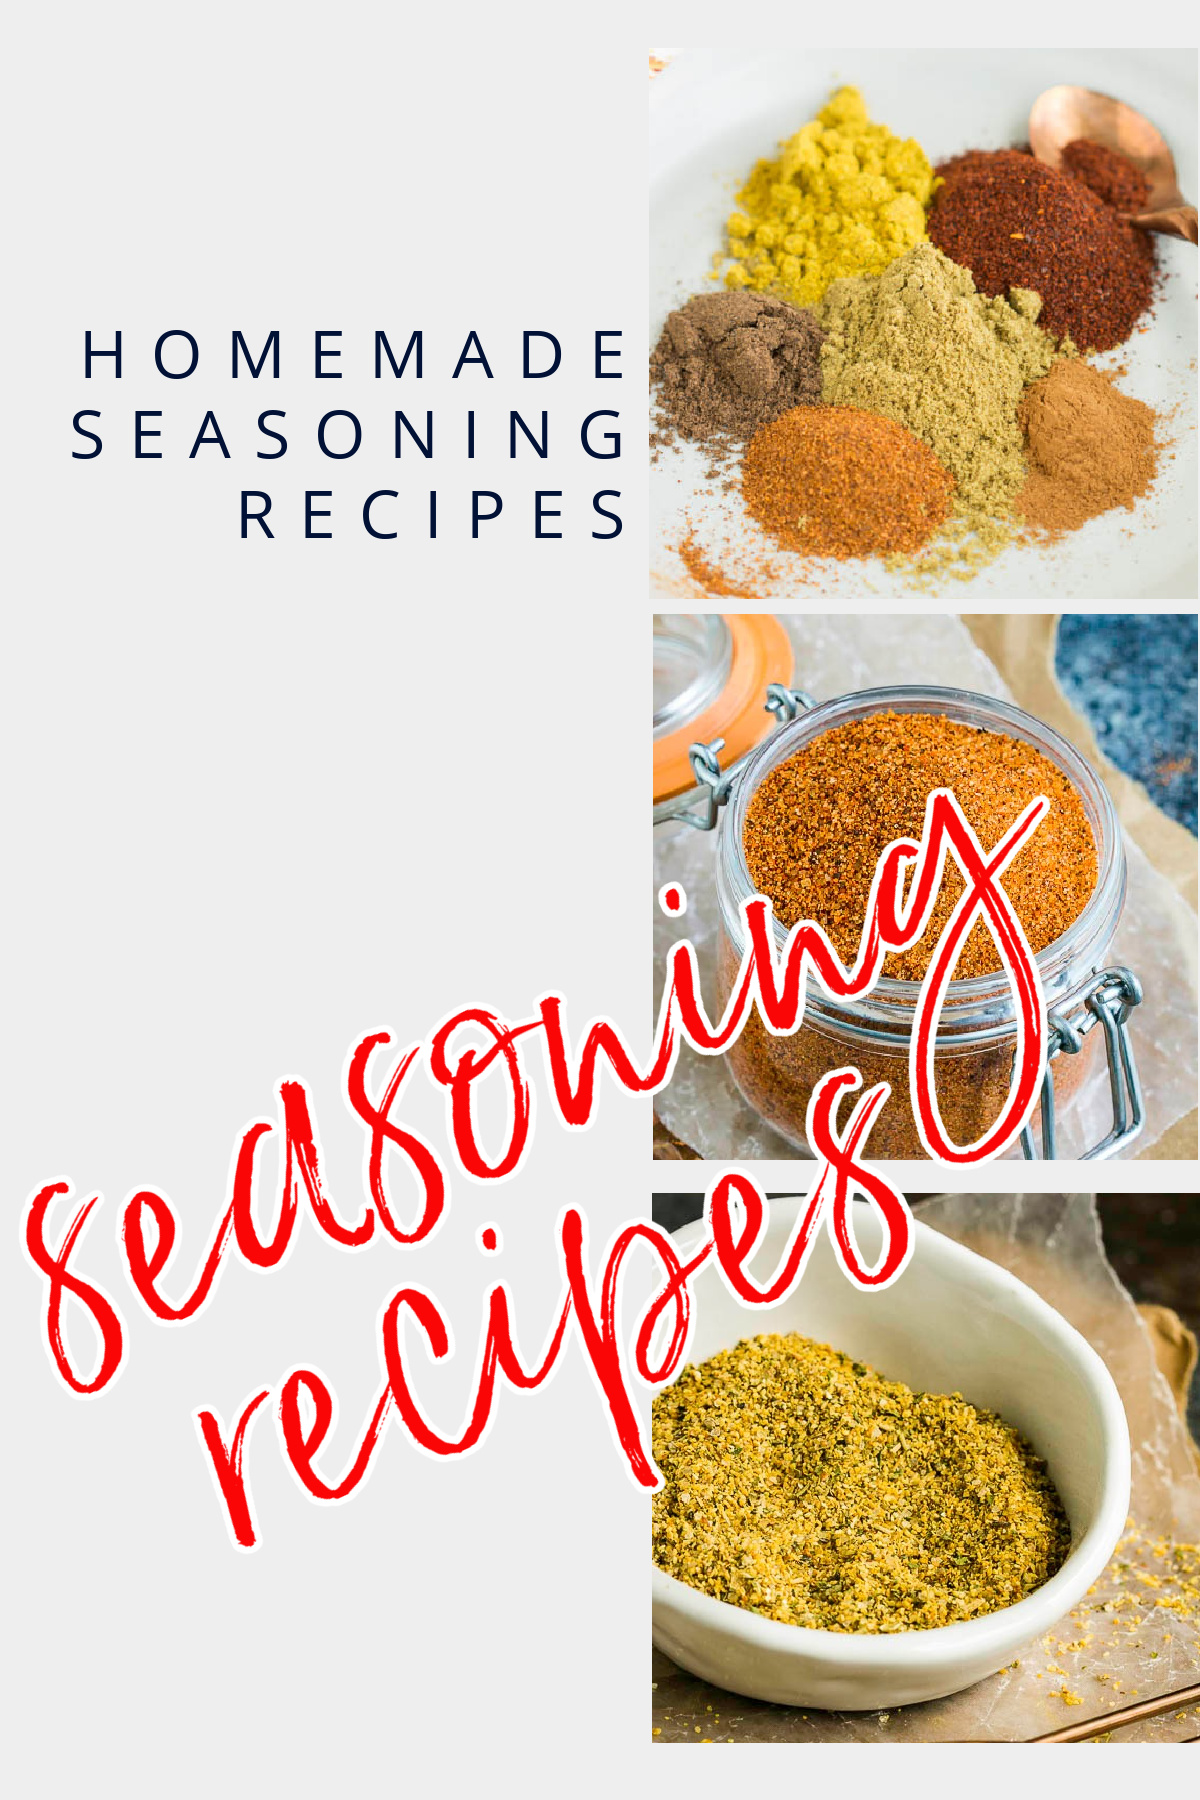 Favorite Homemade Seasonings is a collection of recipes of savory spice mixes for meat and fish.